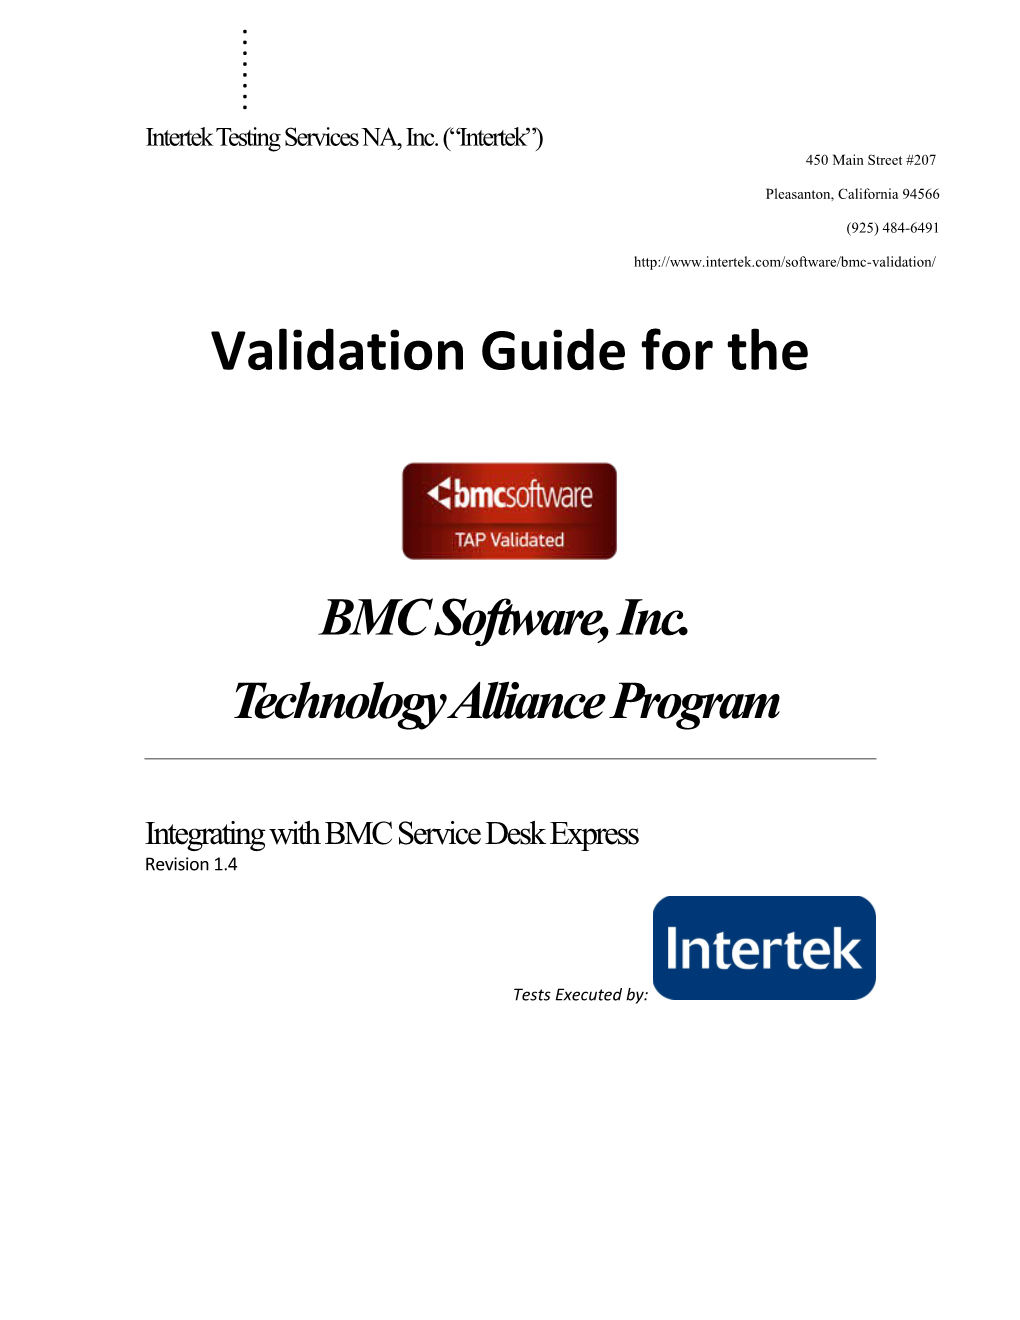 Validation Guide for the Magic Technology Alliance Program